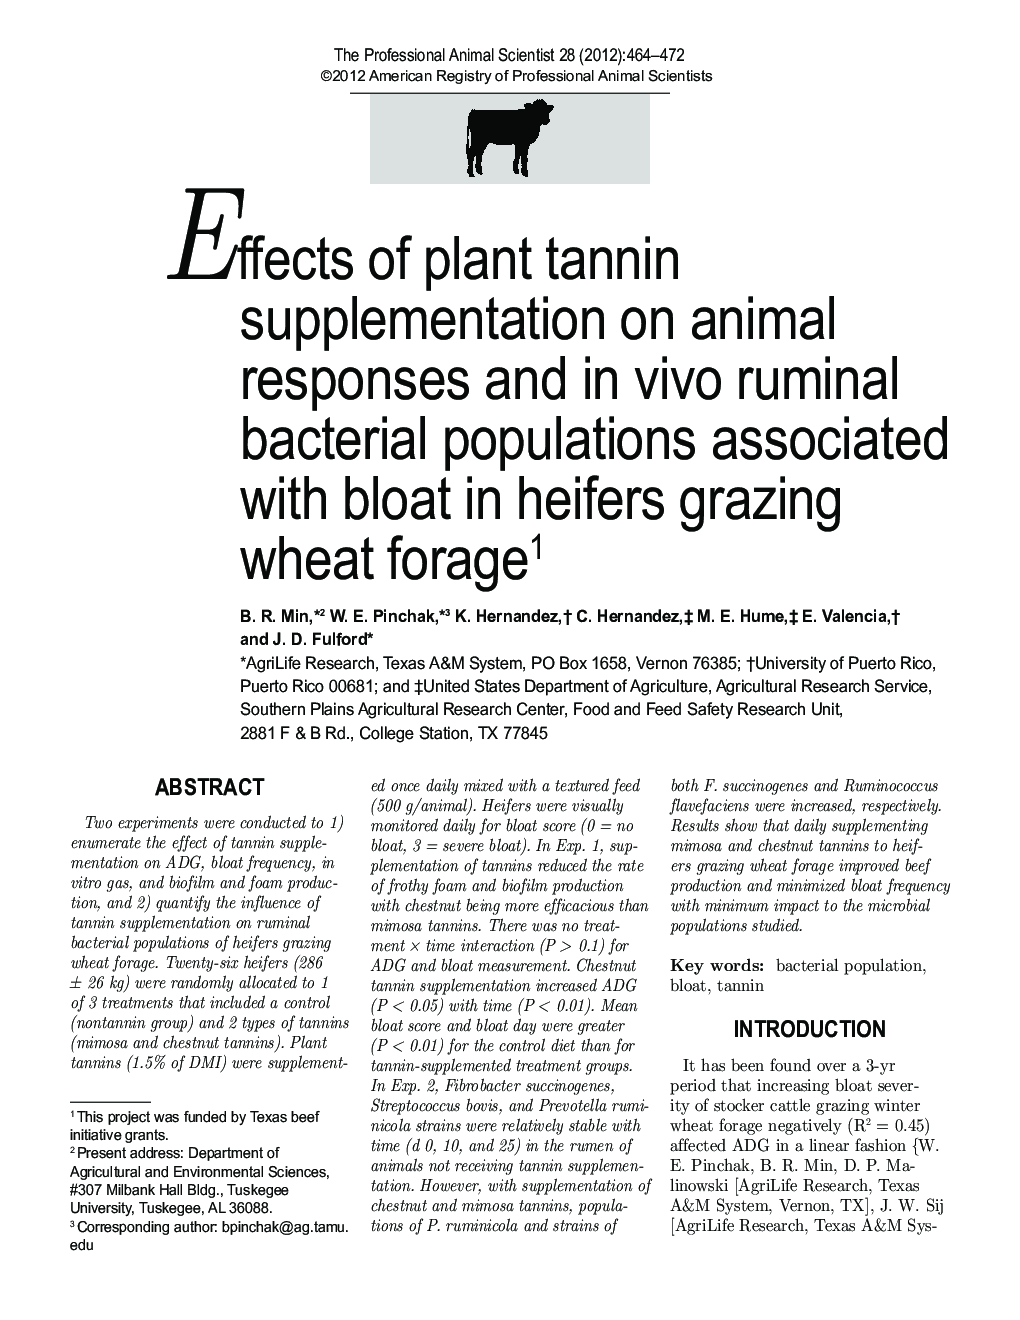 Effects of plant tannin supplementation on animal responses and in vivo ruminal bacterial populations associated with bloat in heifers grazing wheat forage1